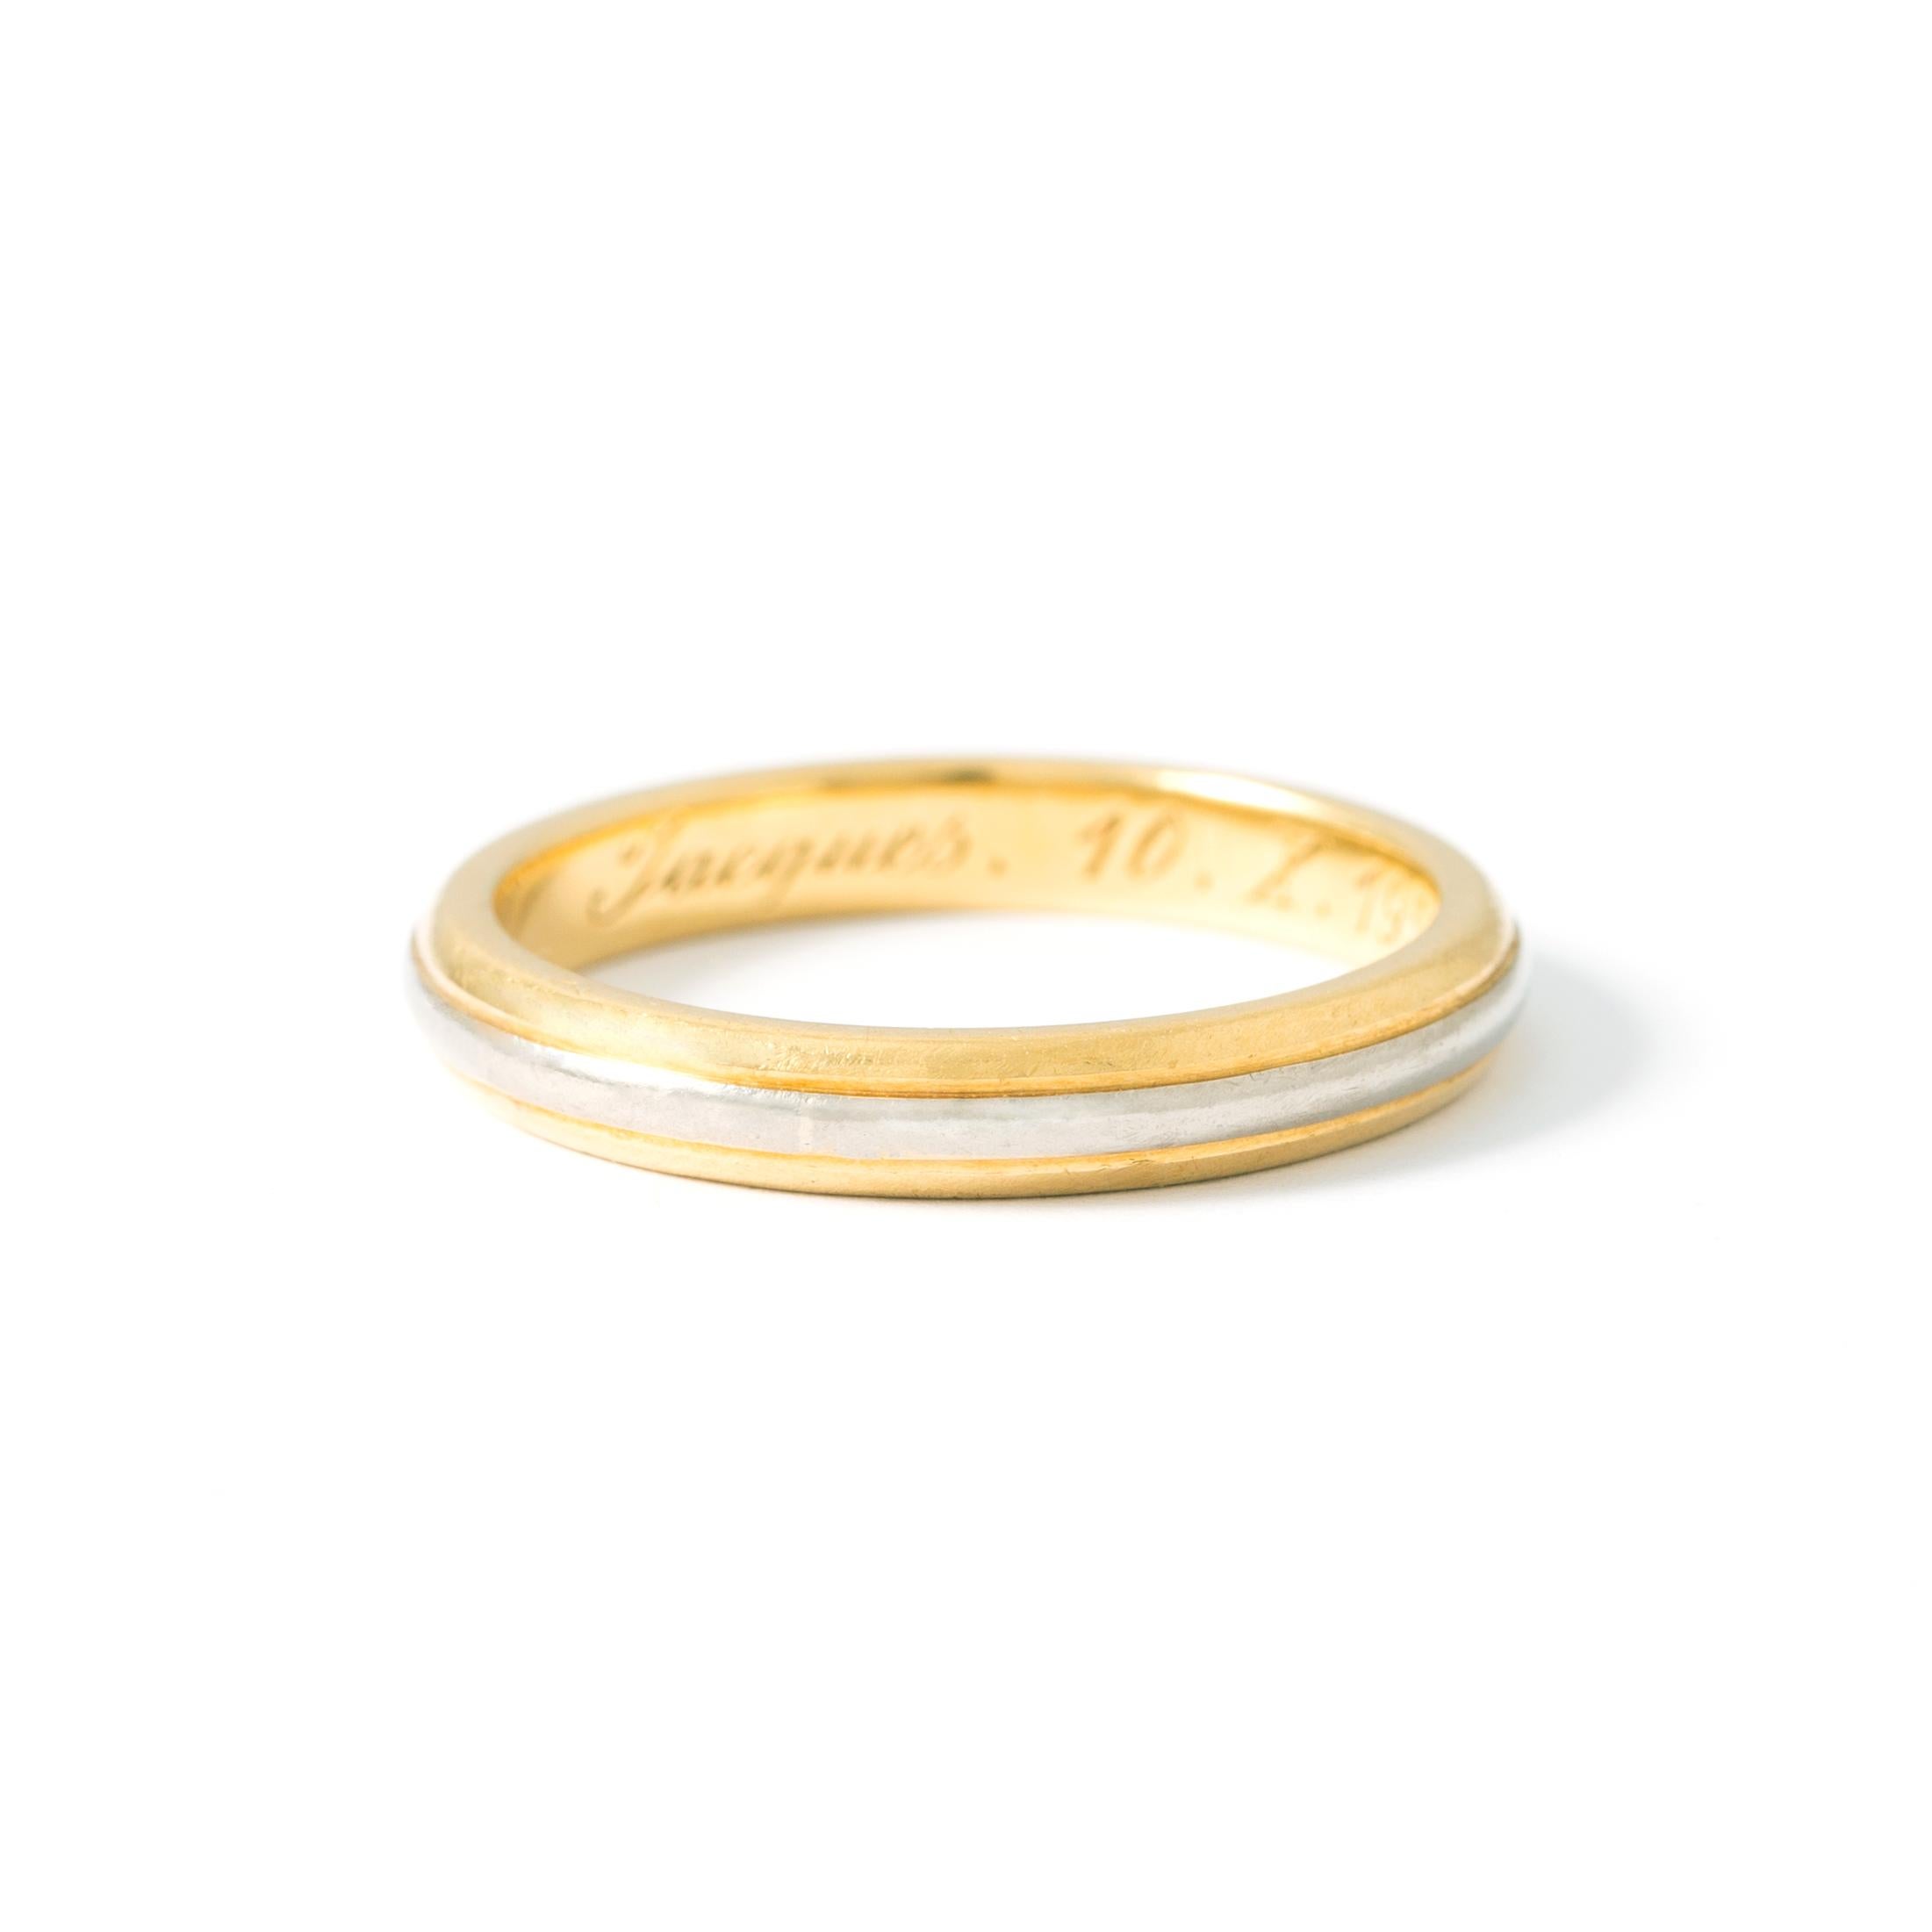 18K yellow and white gold wedding band with interior engraving. Dated 1955.
Finger size: 53.
Total weight 3.96g.